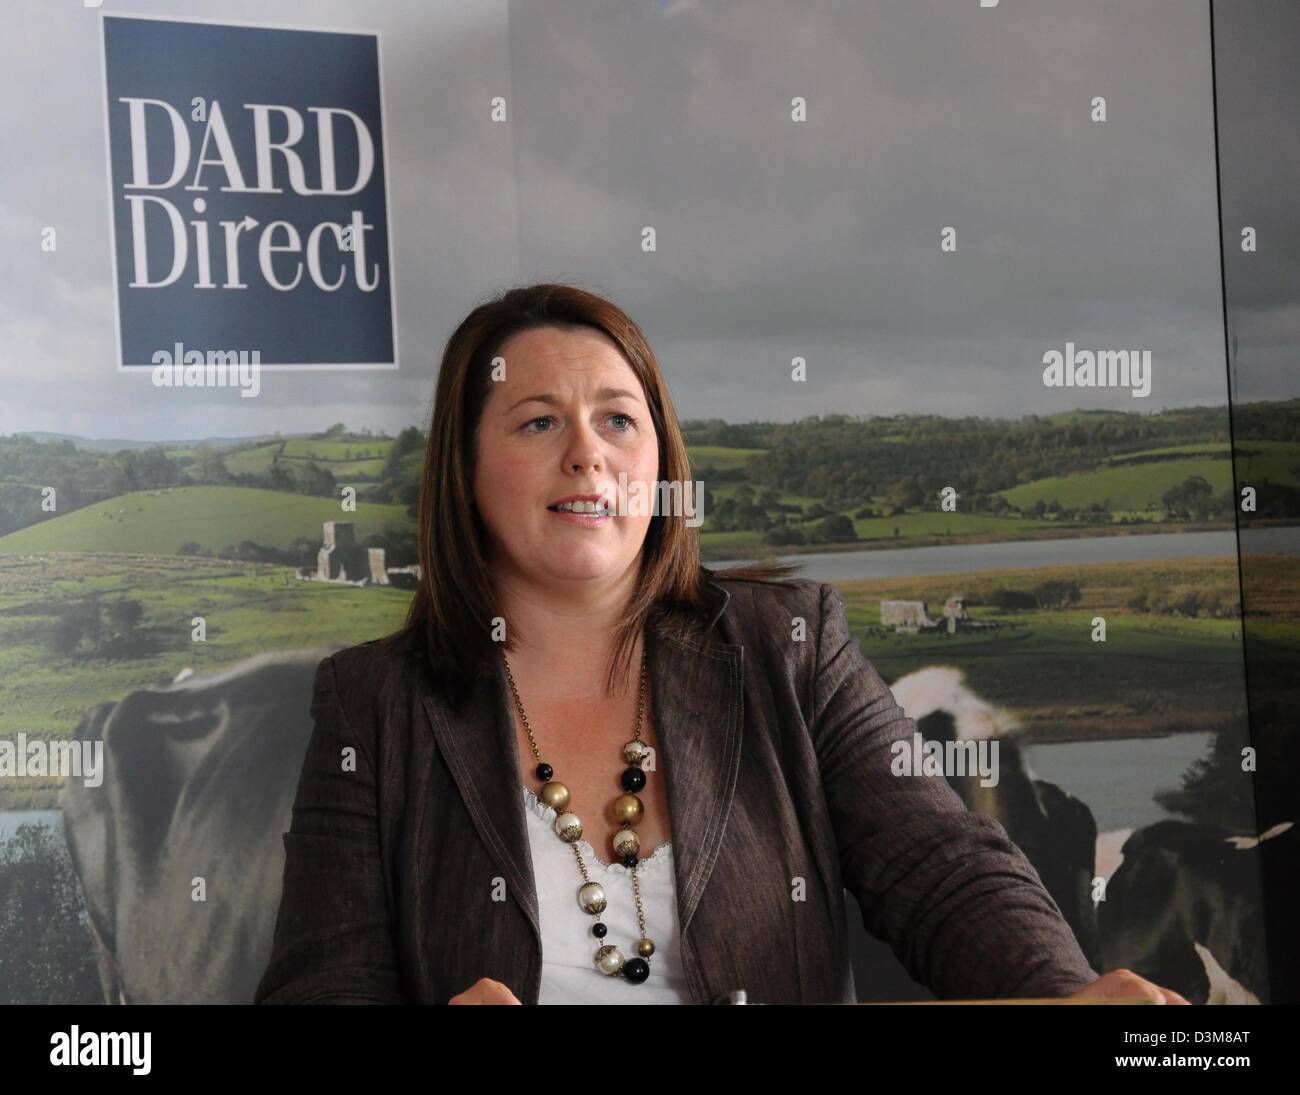 Glenree House, Newry. 2 June 2010. Agriculture Minister Michelle Gildernew officially opens the newly refurbished DARD Direct Of Stock Photo